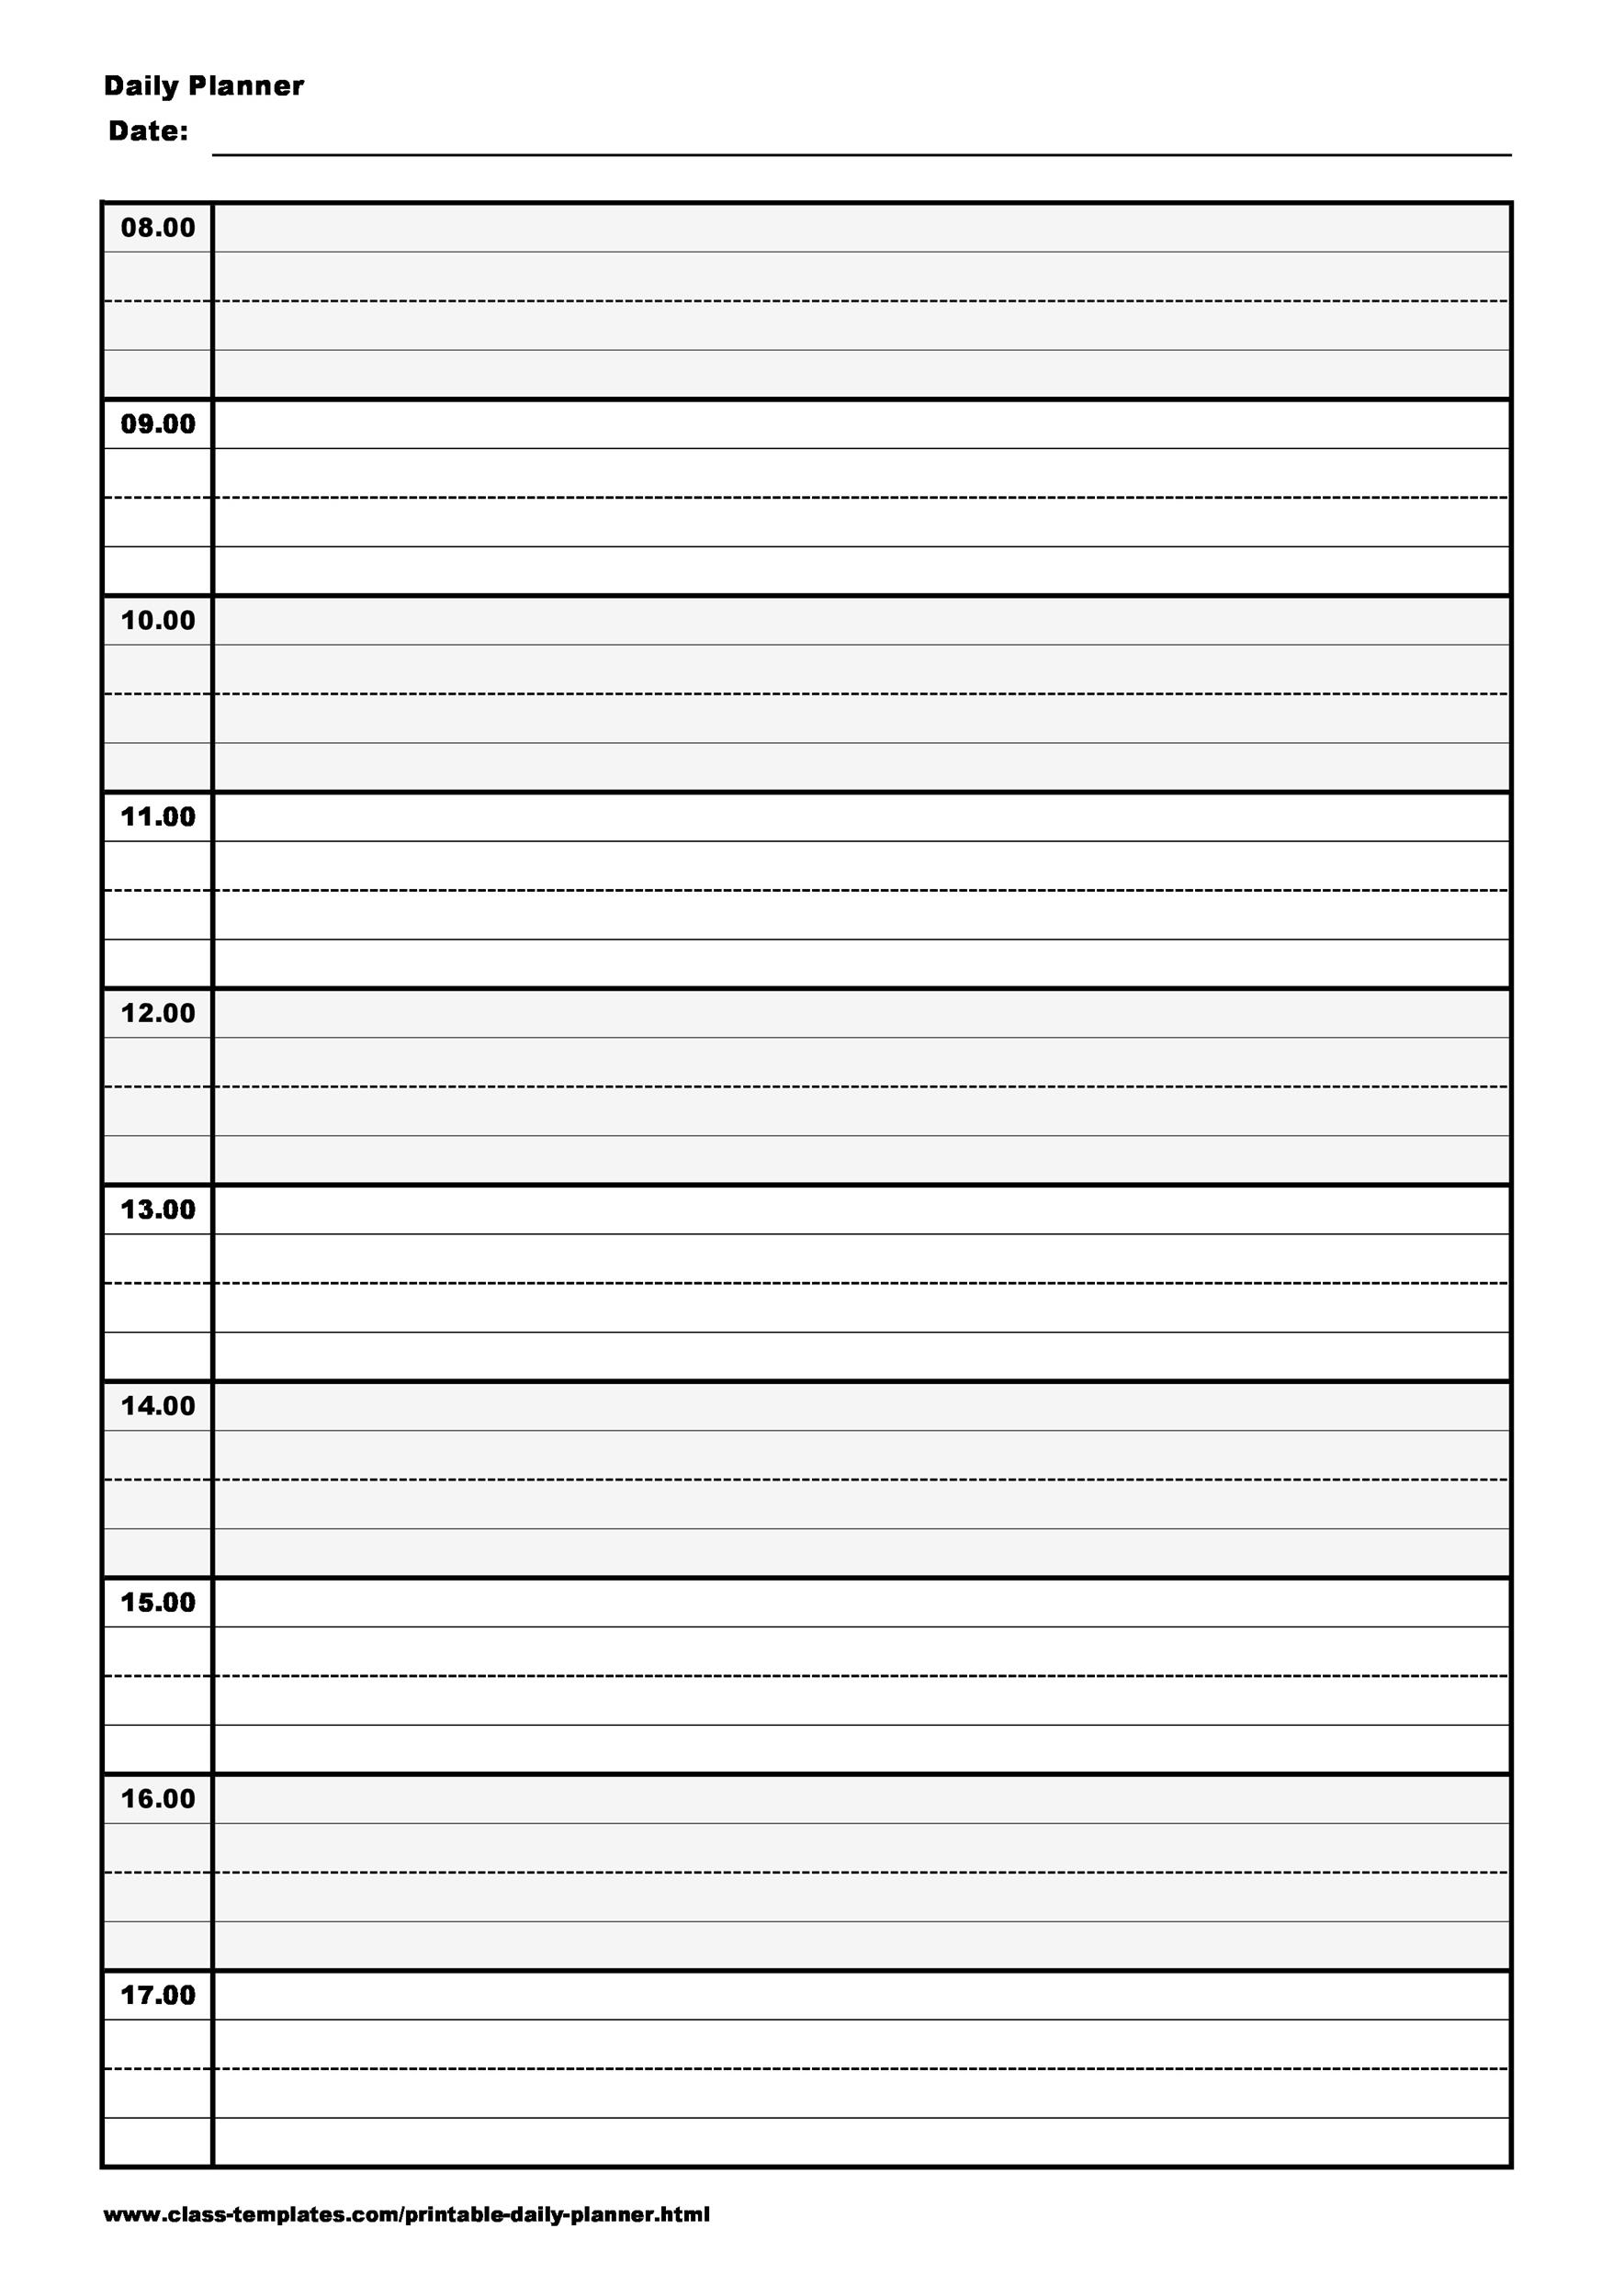 5 Free Printable Daily Planner Template Pdf Pin On New Year 2014 Customizable Daily Schedule 